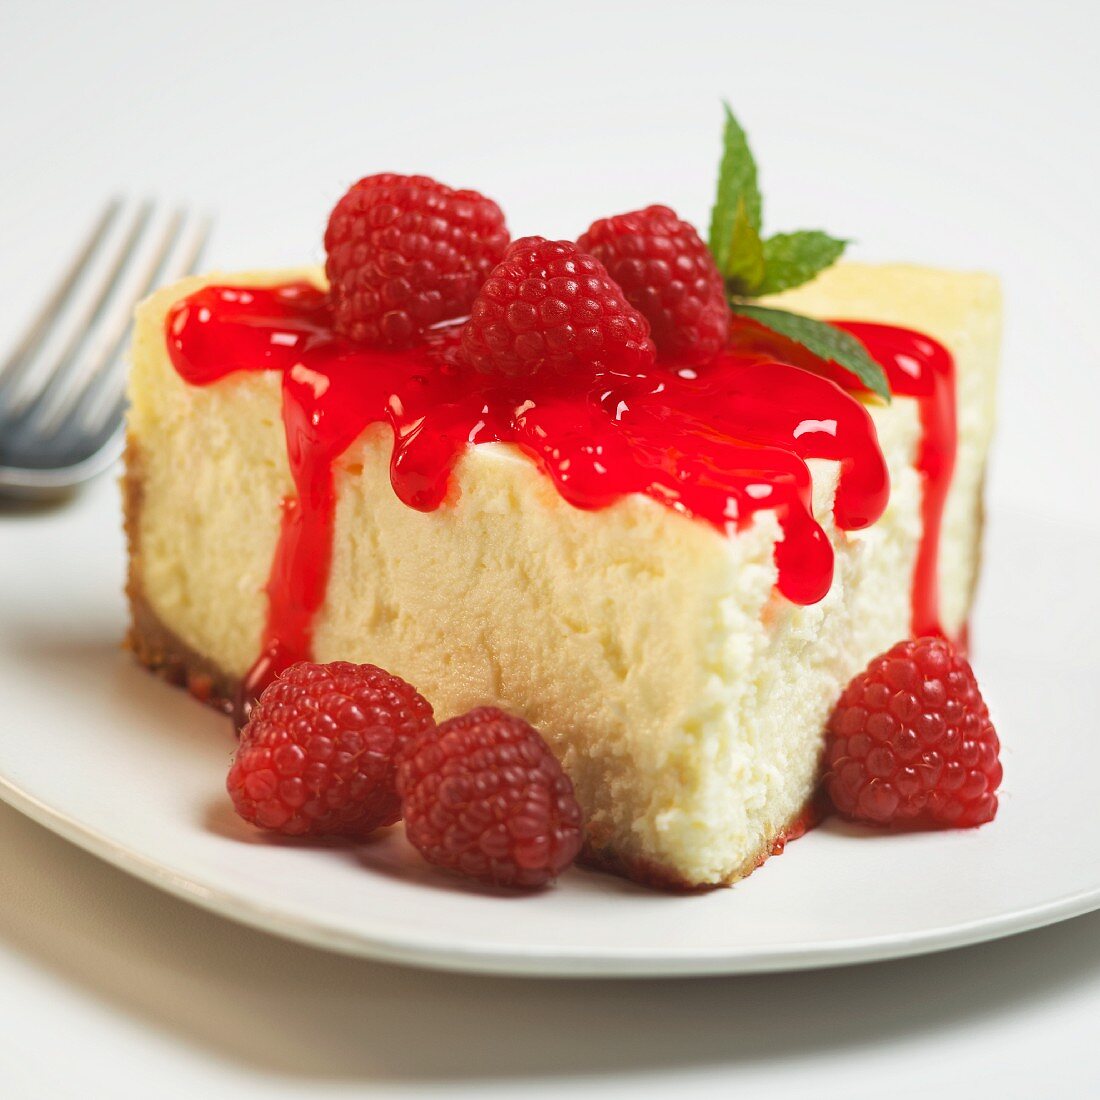 Slice of Cheesecake with Raspberry Sauce; On a White Plate; Close Up